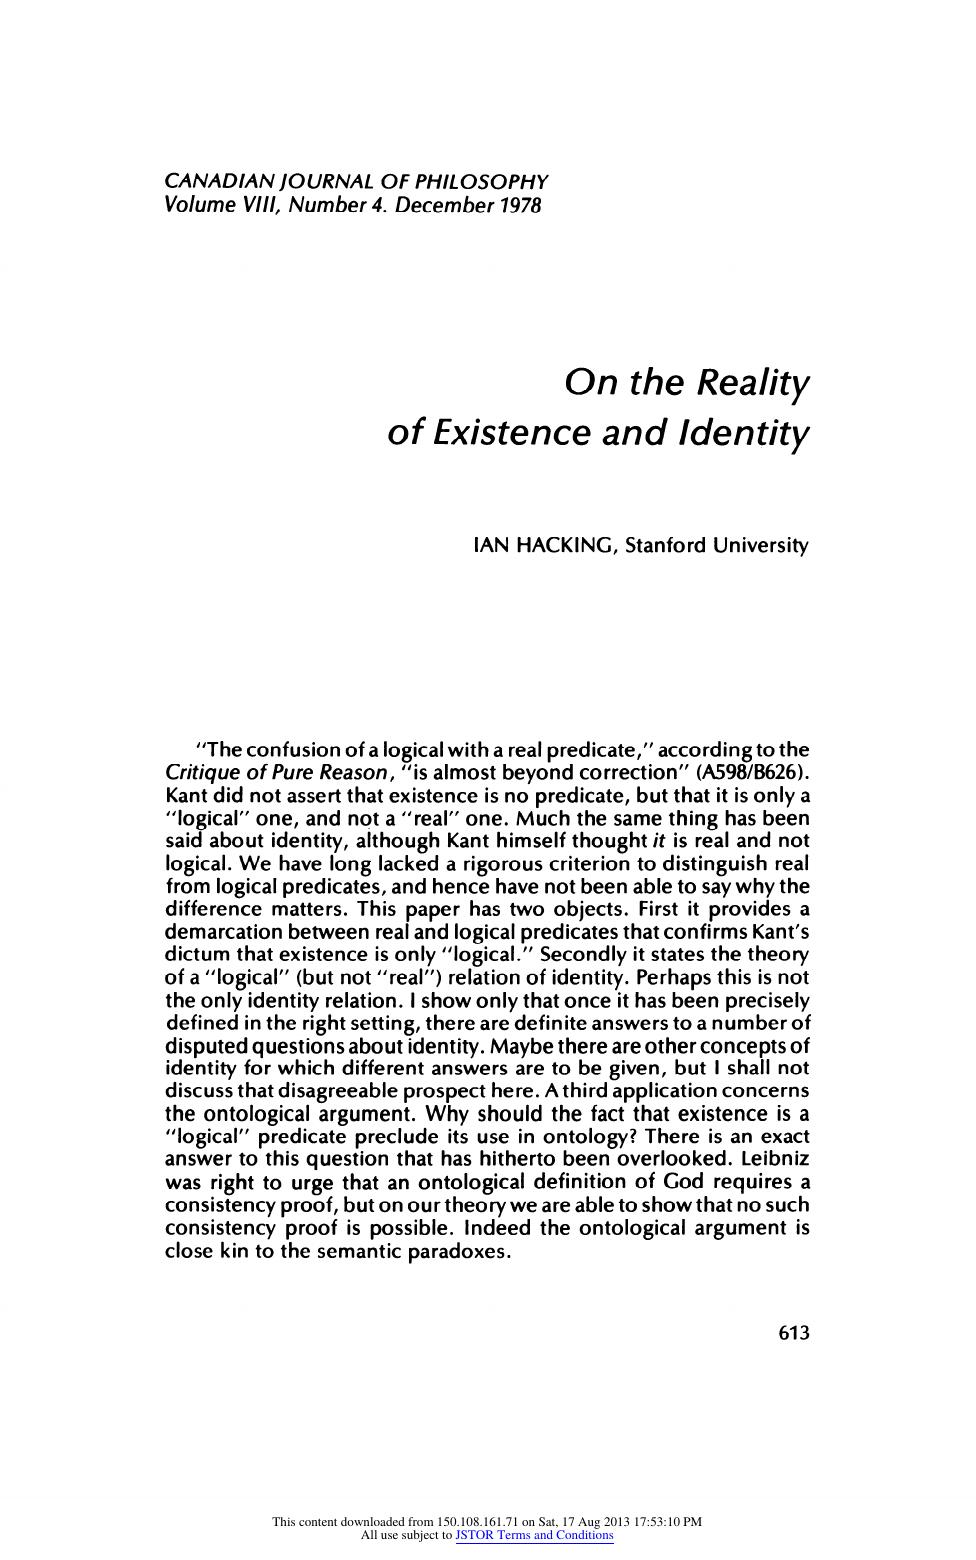 On the Reality of Existence and Identity by On the Reality of Existence & Identity (1978)